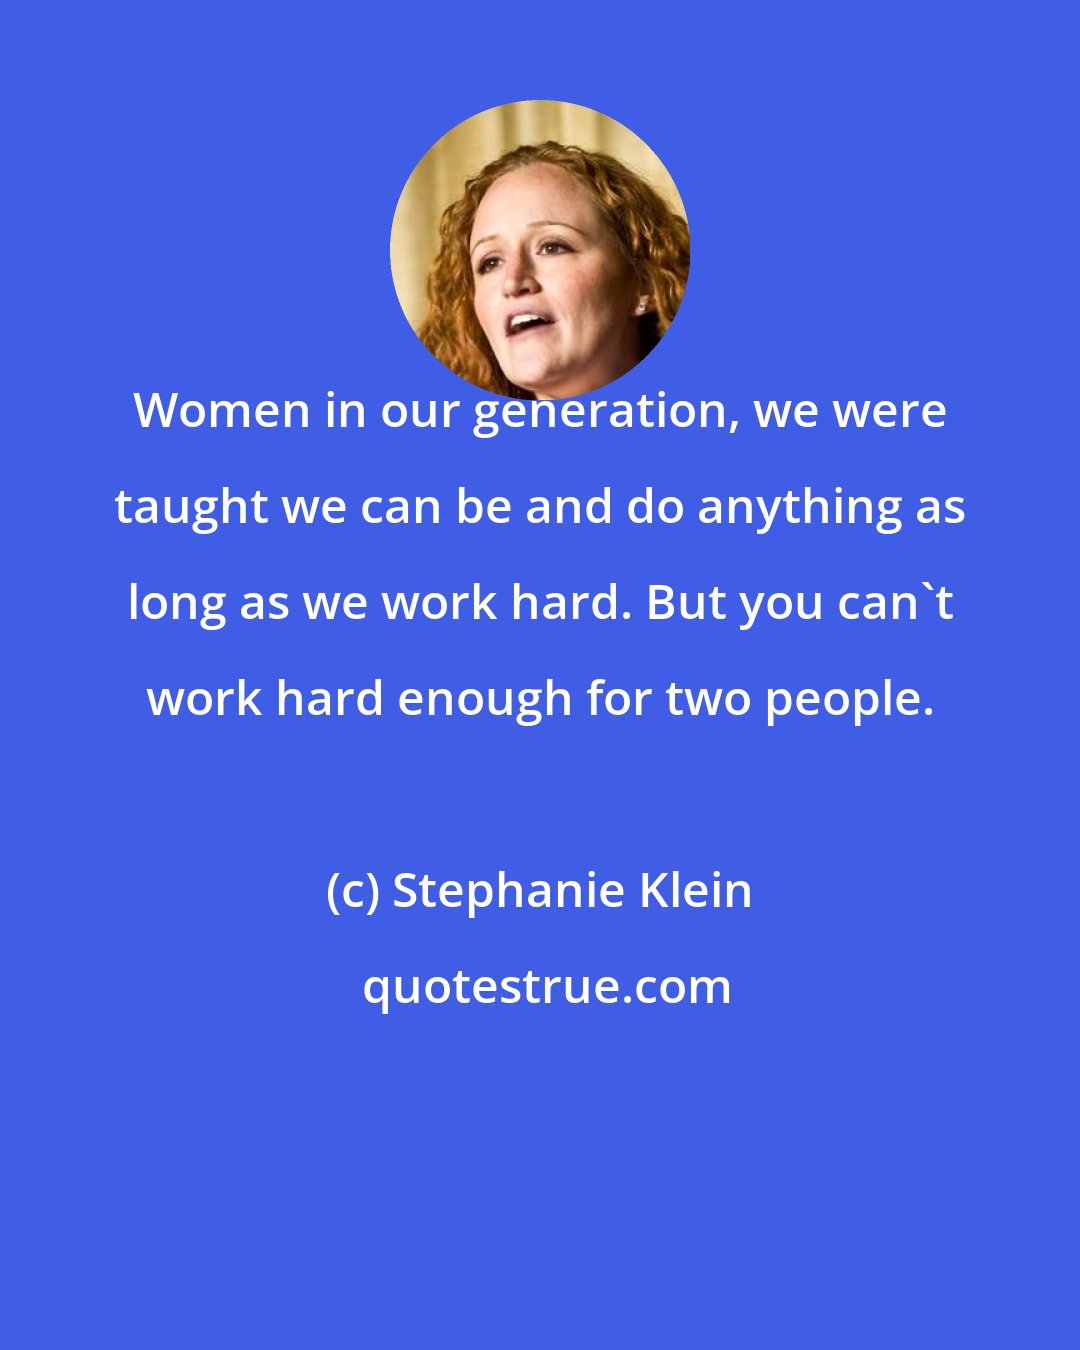 Stephanie Klein: Women in our generation, we were taught we can be and do anything as long as we work hard. But you can't work hard enough for two people.